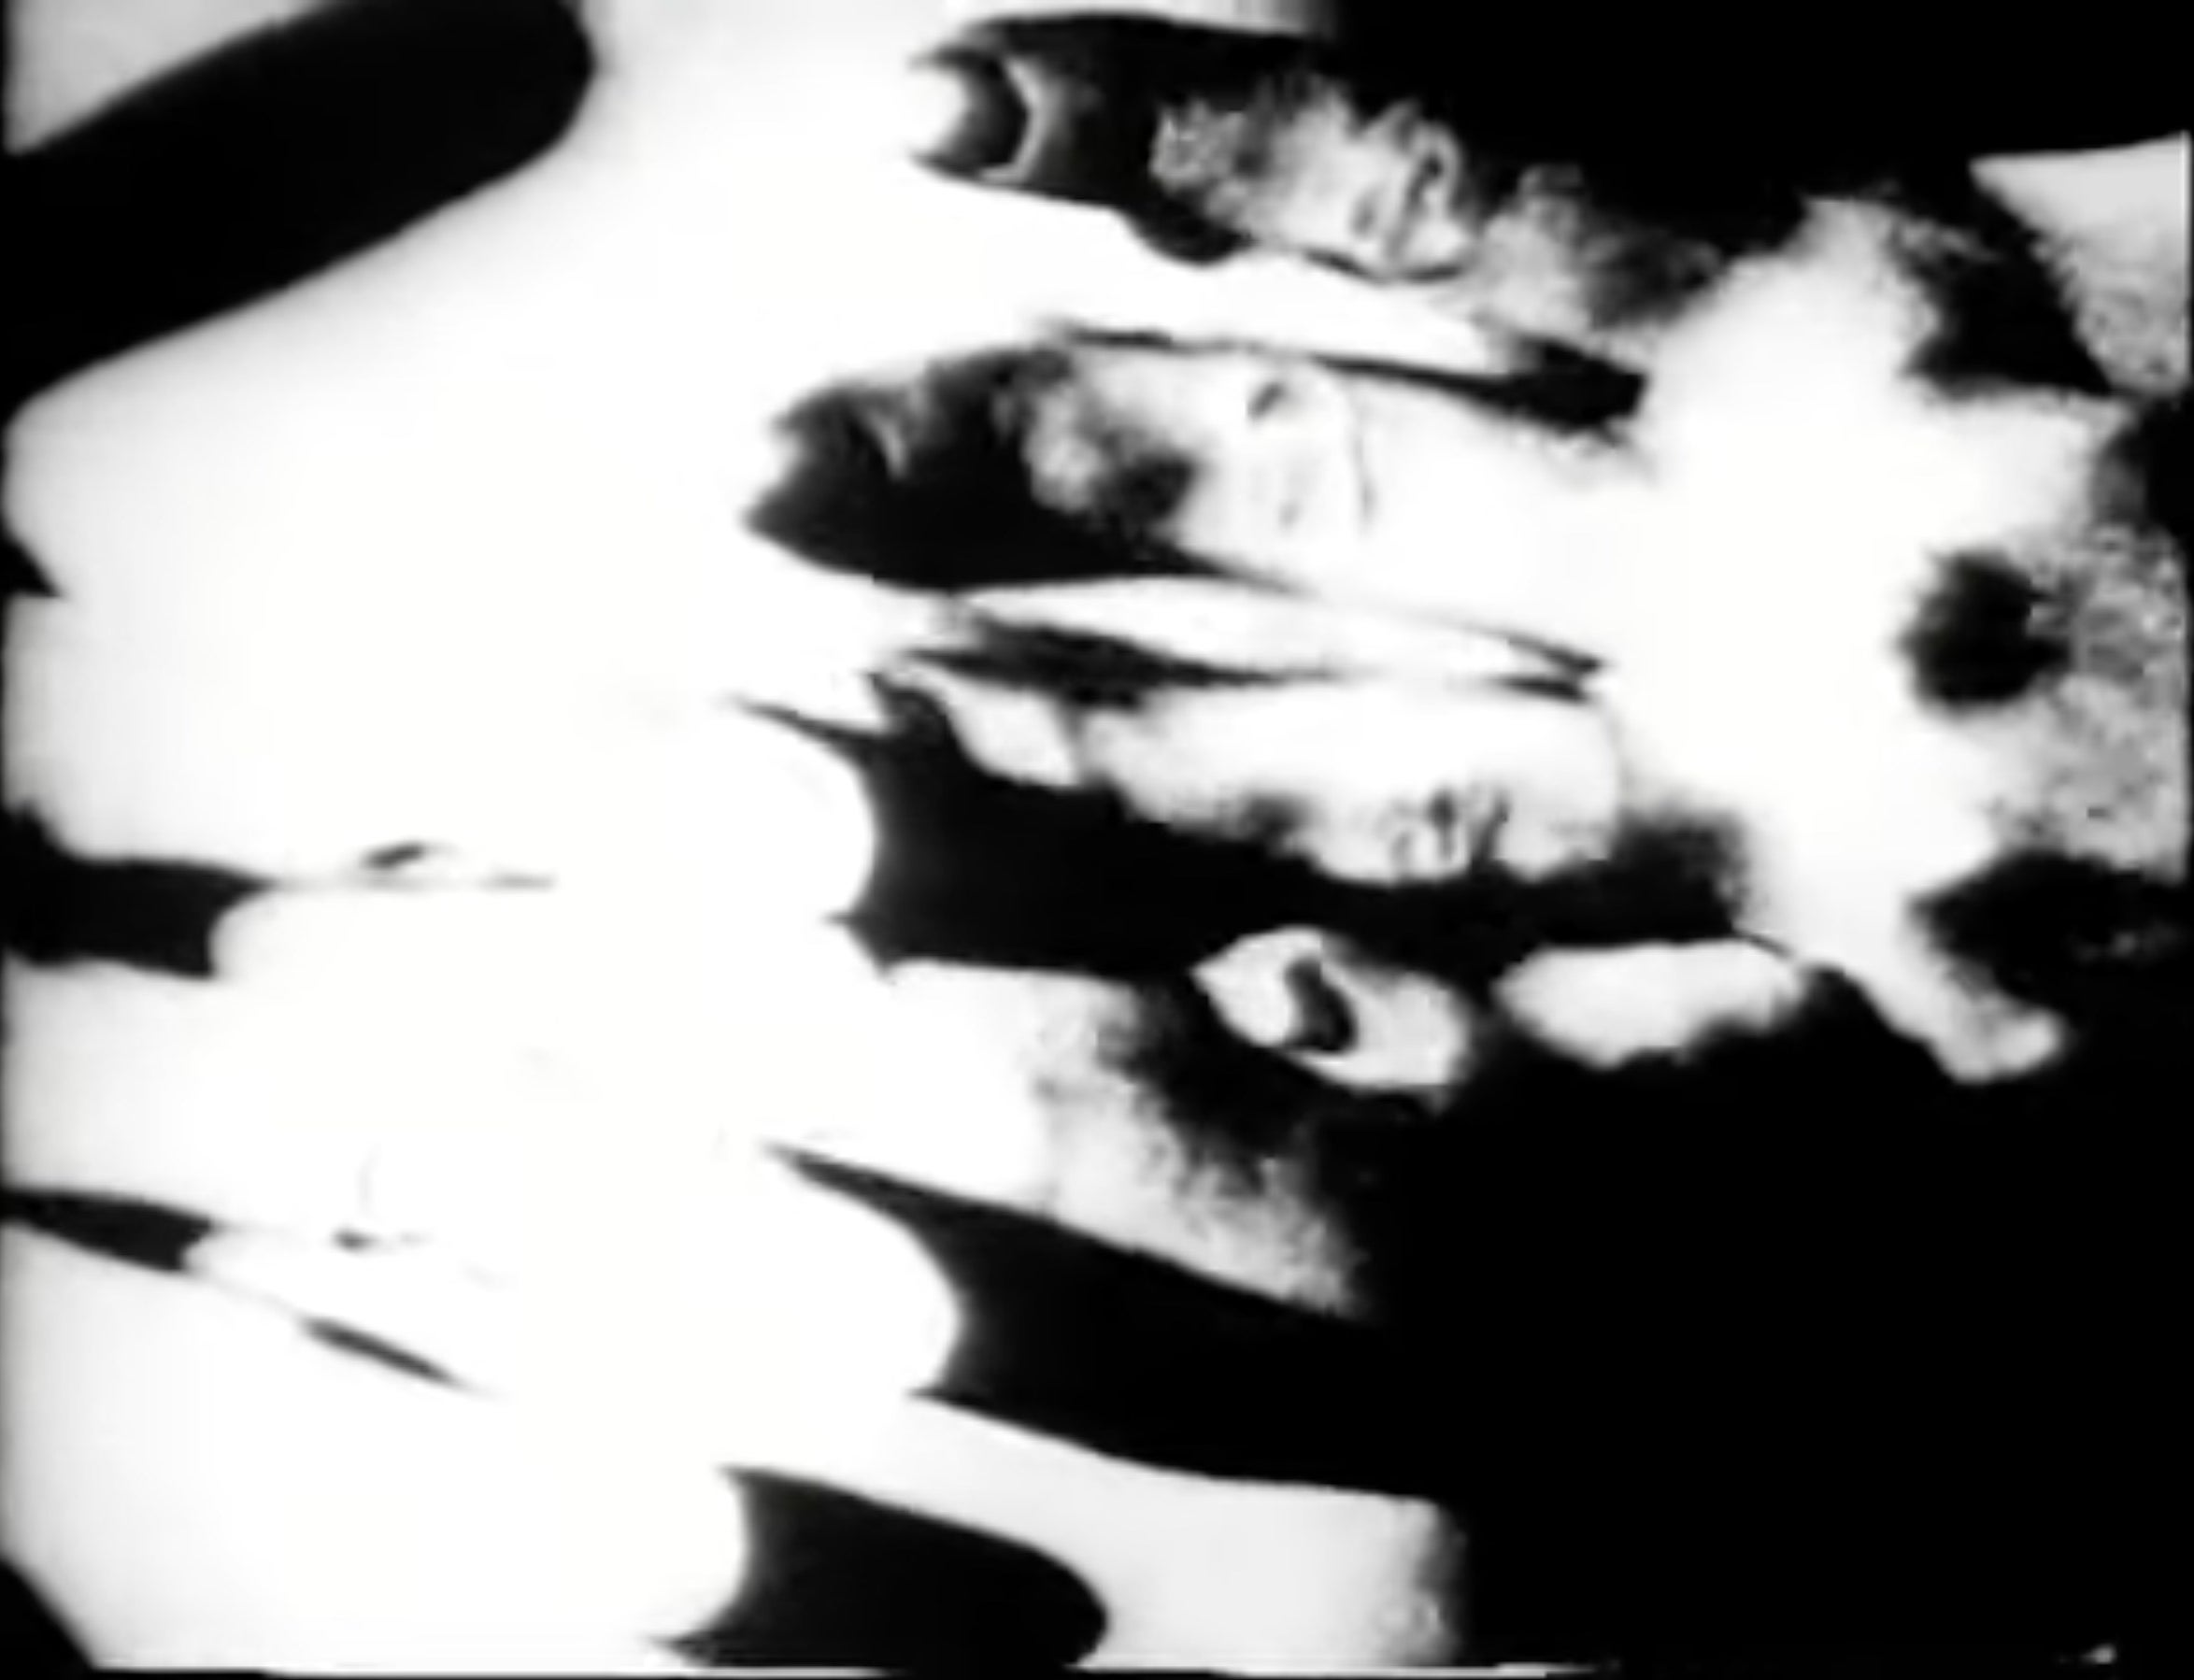 Blurry black-and-white image of a hand